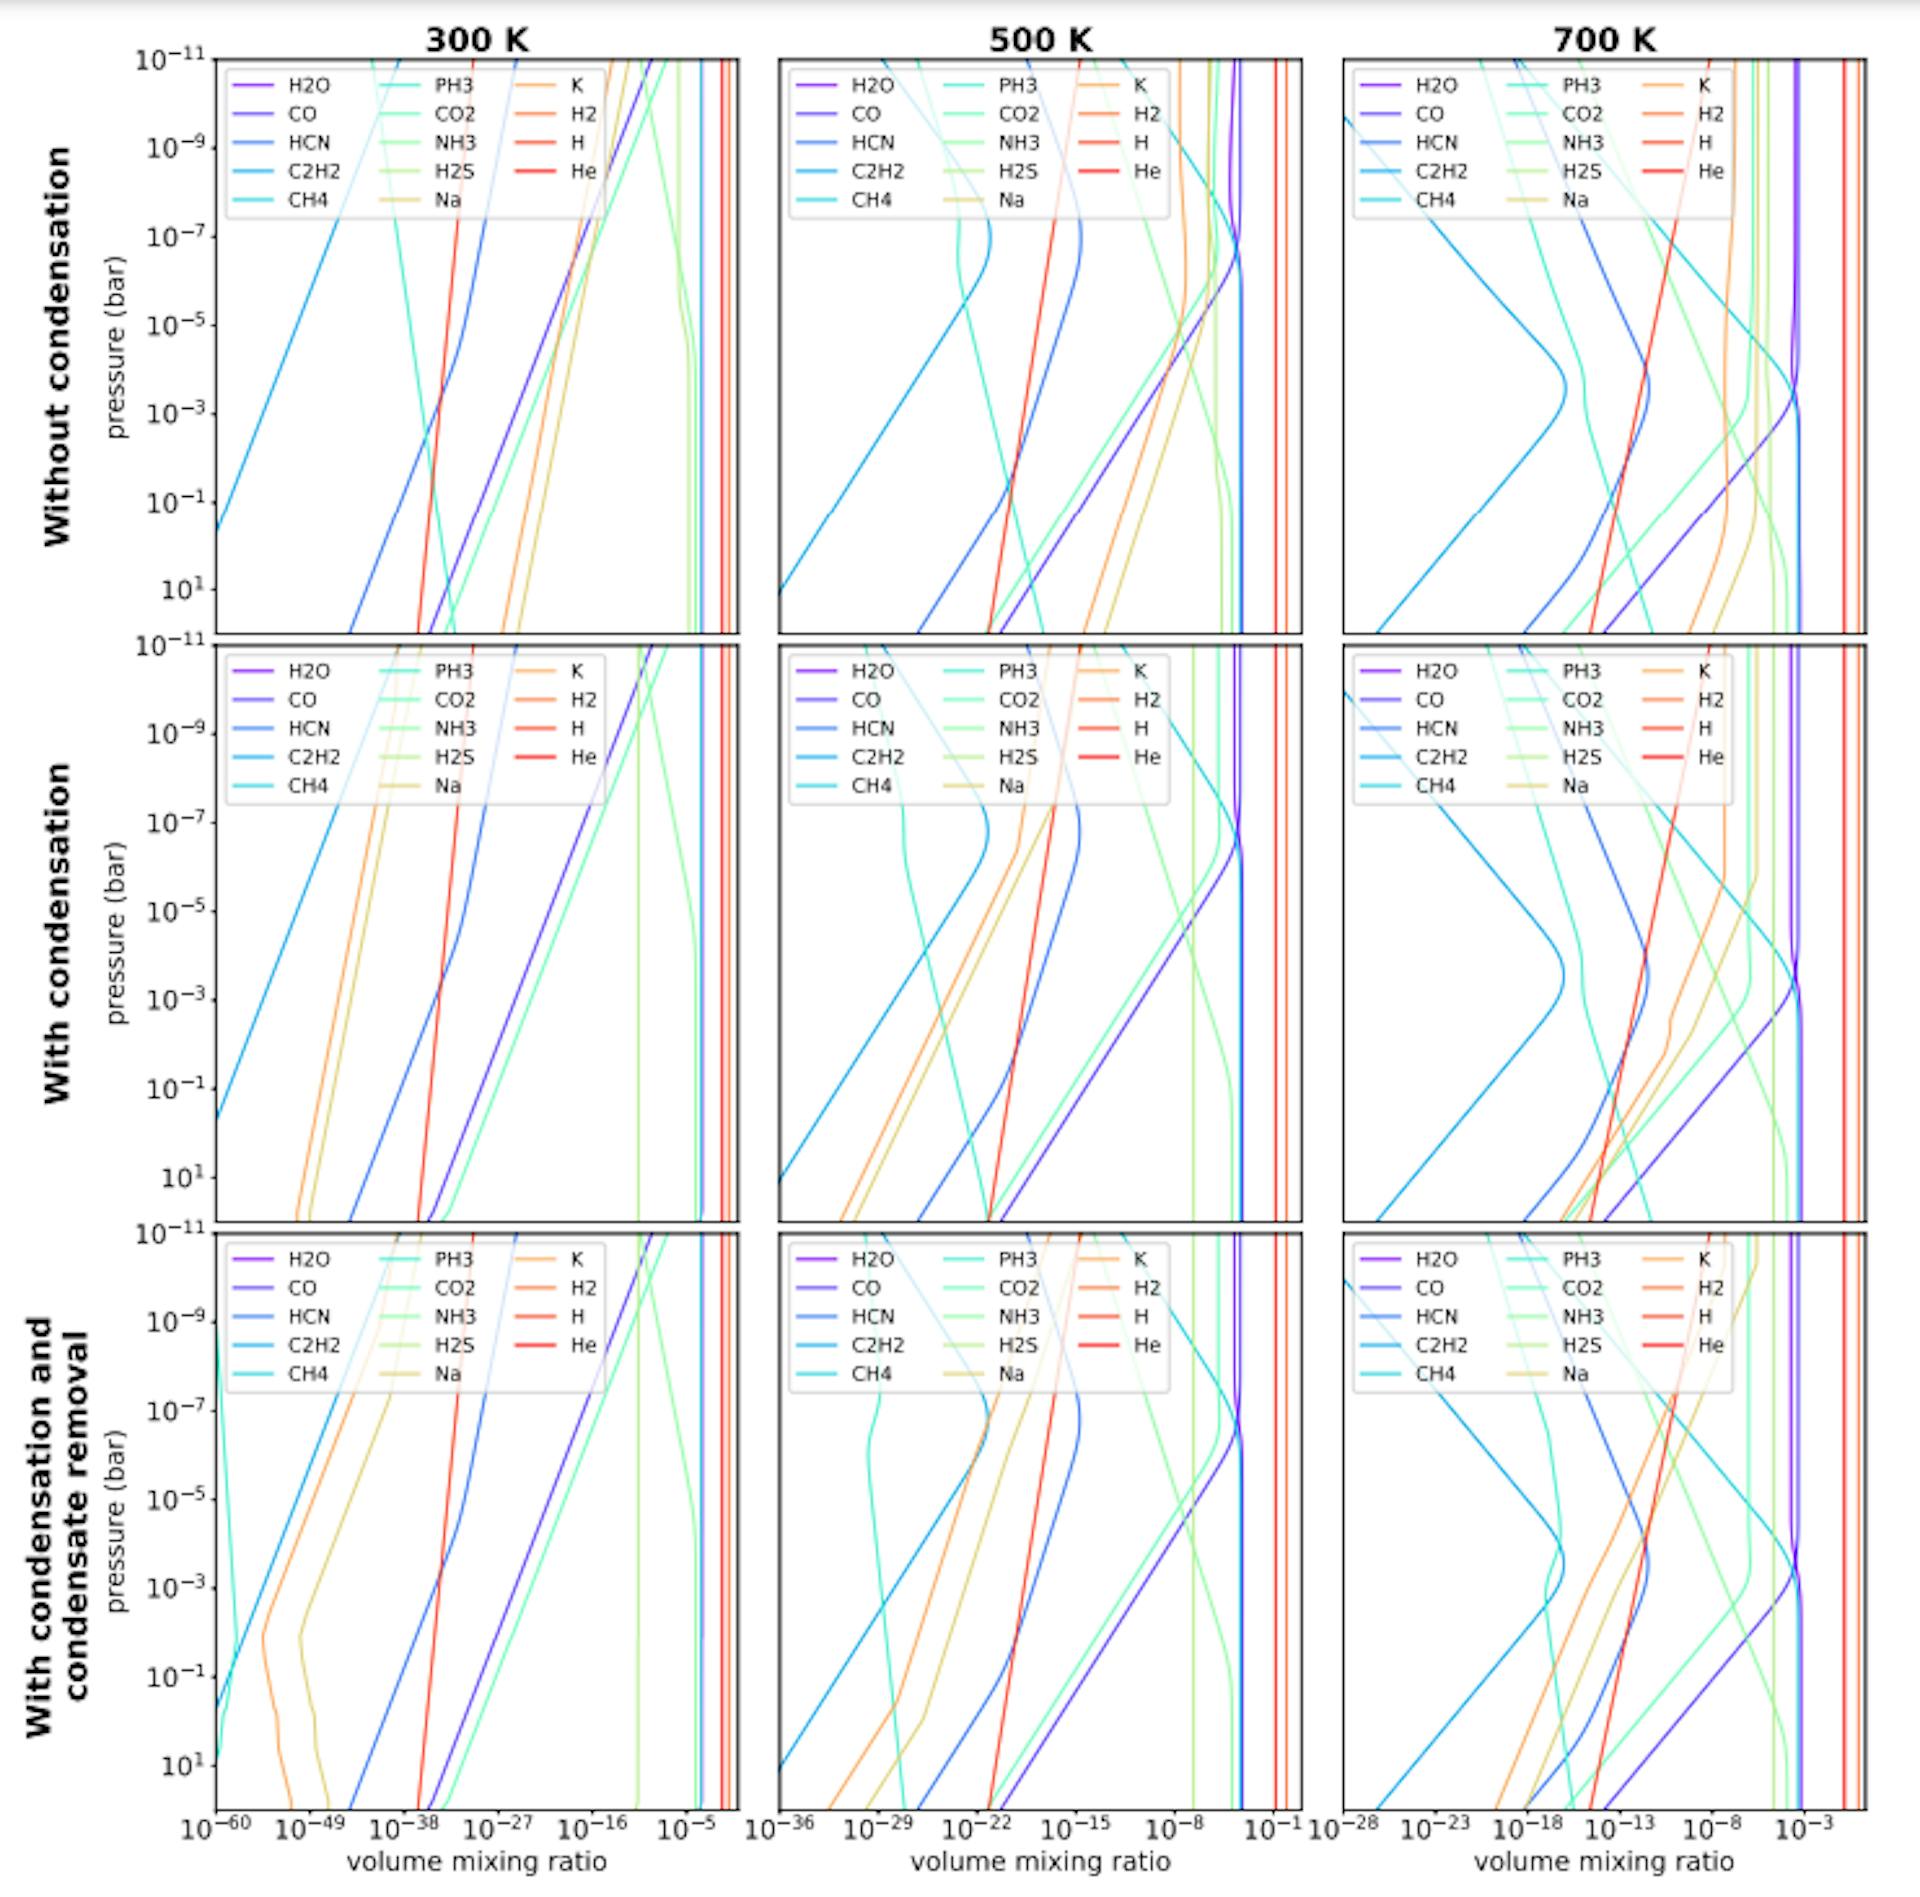 Figure 1. Chemical equilibrium abundance profiles for GJ 486b computed by GGchem. Columns: isothermal pressuretemperature profiles at 300 K (left), 500 K (middle), and 700 K (right). Rows: no condensation (top), condensation included (middle), condensation and rain out (bottom).